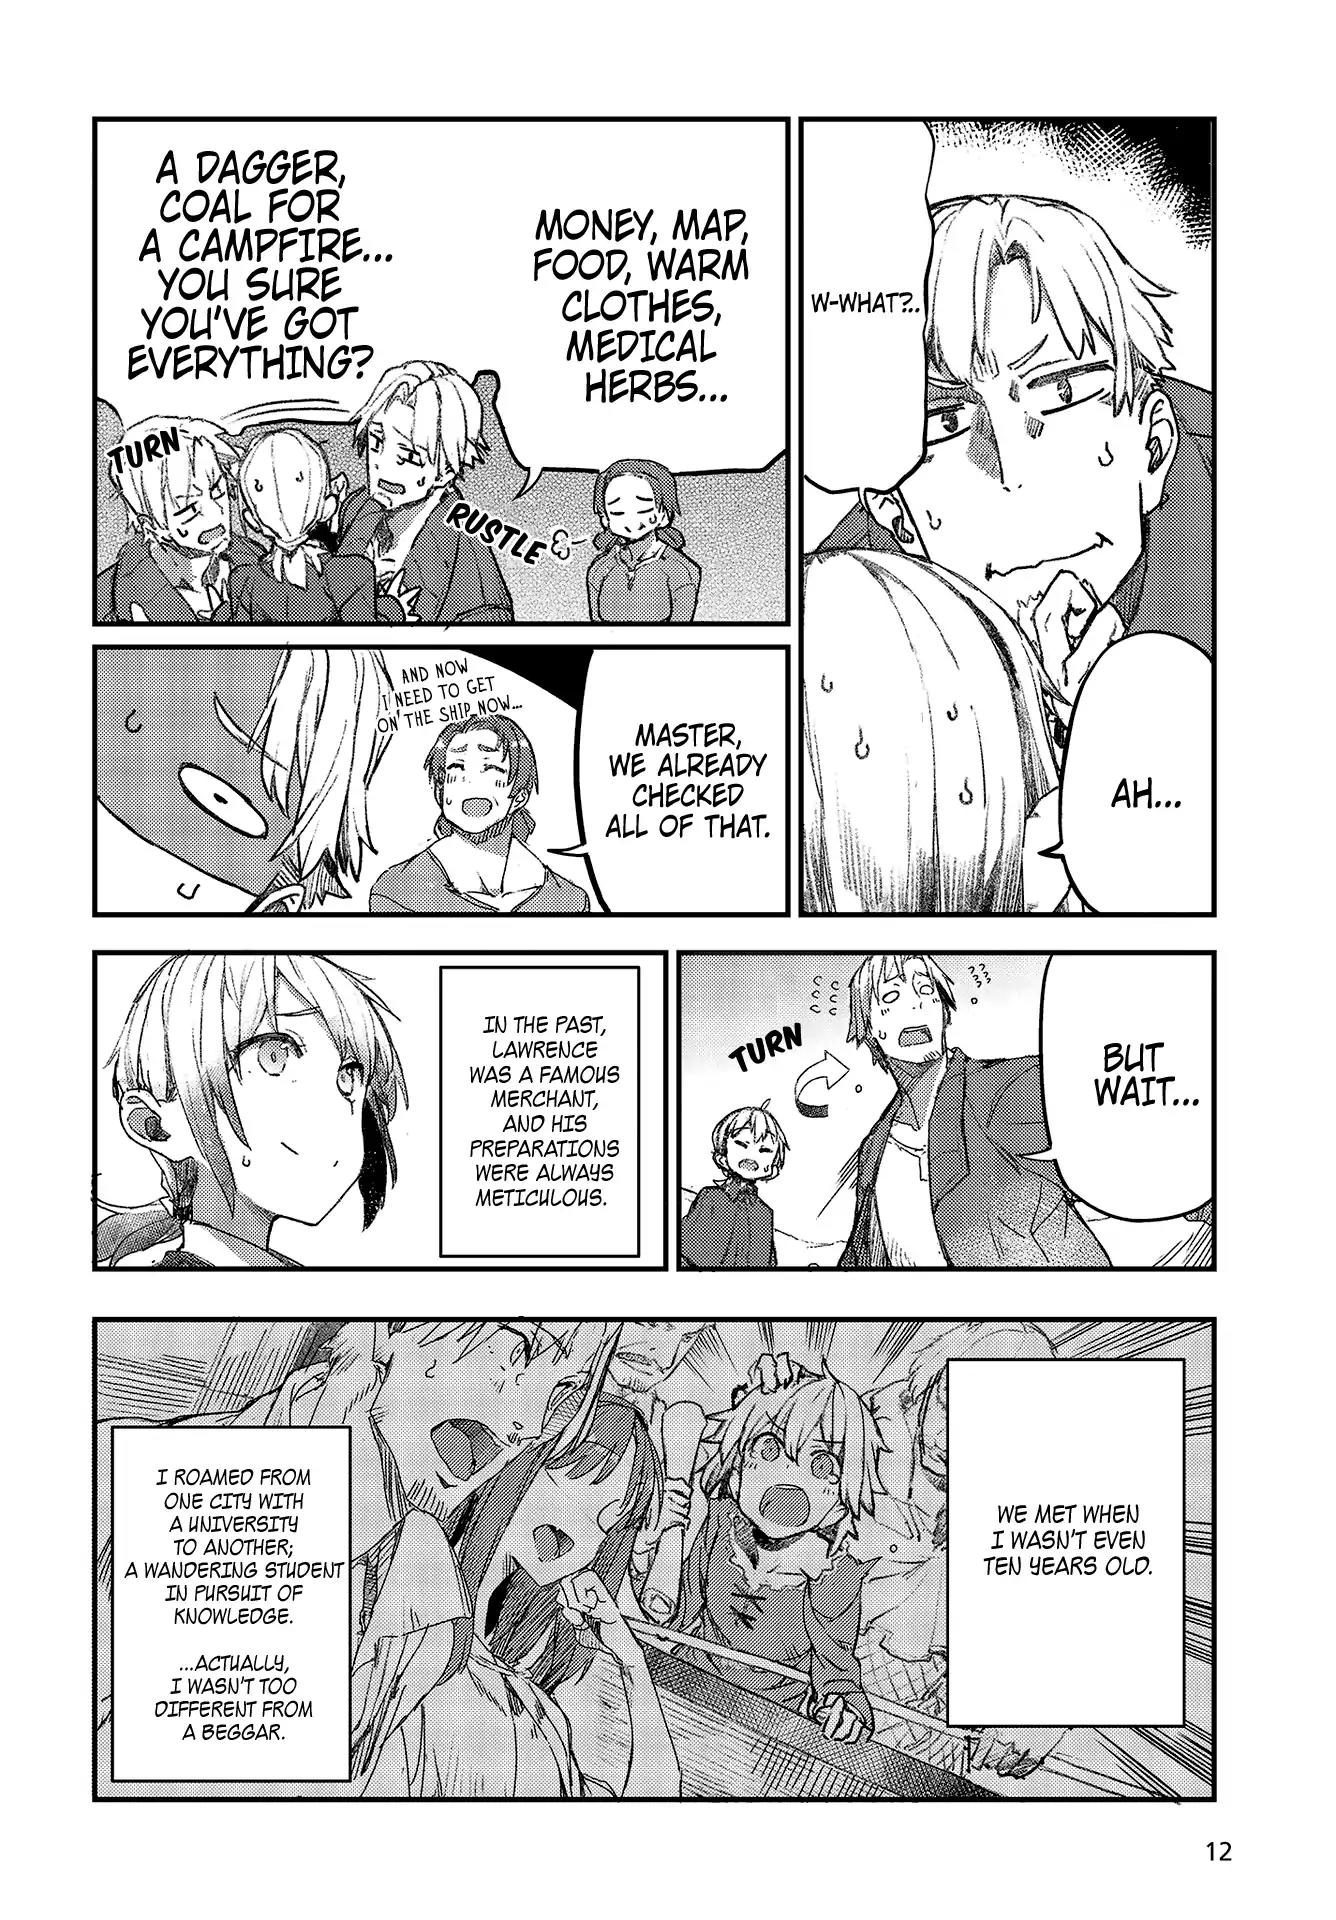 Wolf & Parchment: New Theory Spice & Wolf Vol.1 Chapter 1